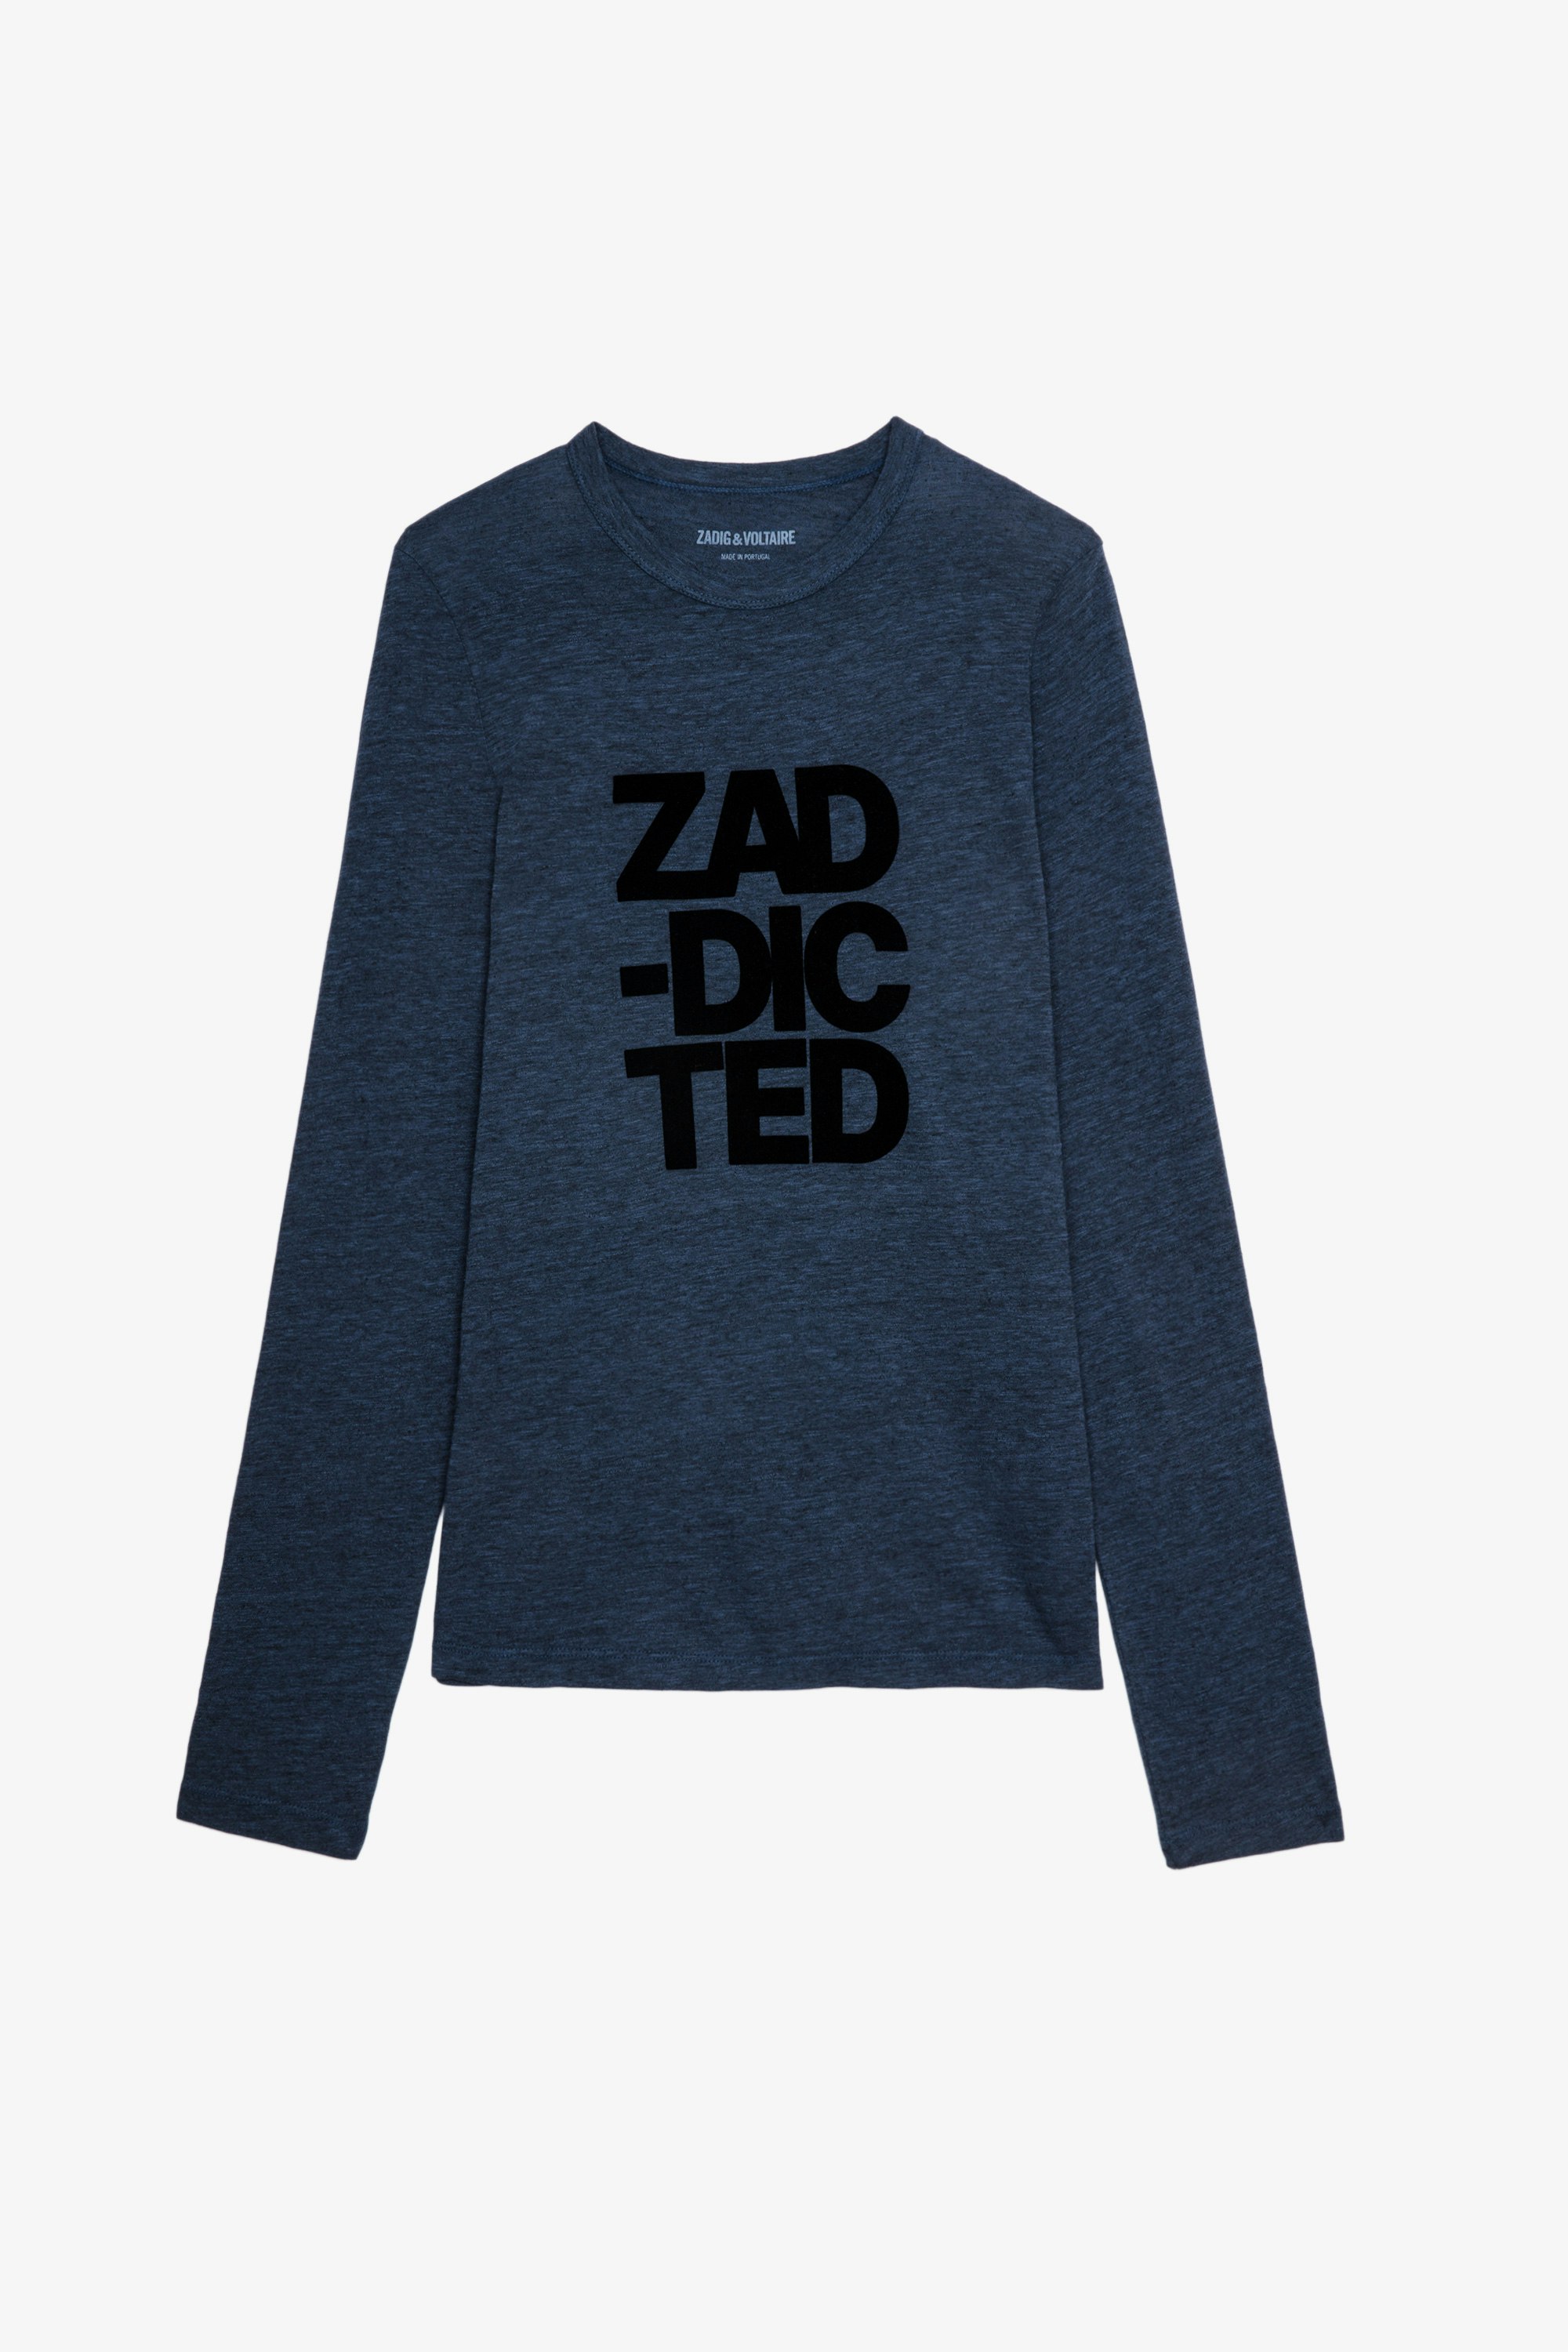 Willy Zaddicted Ｔシャツ Women’s blue T-shirt with zaddicted appliqué